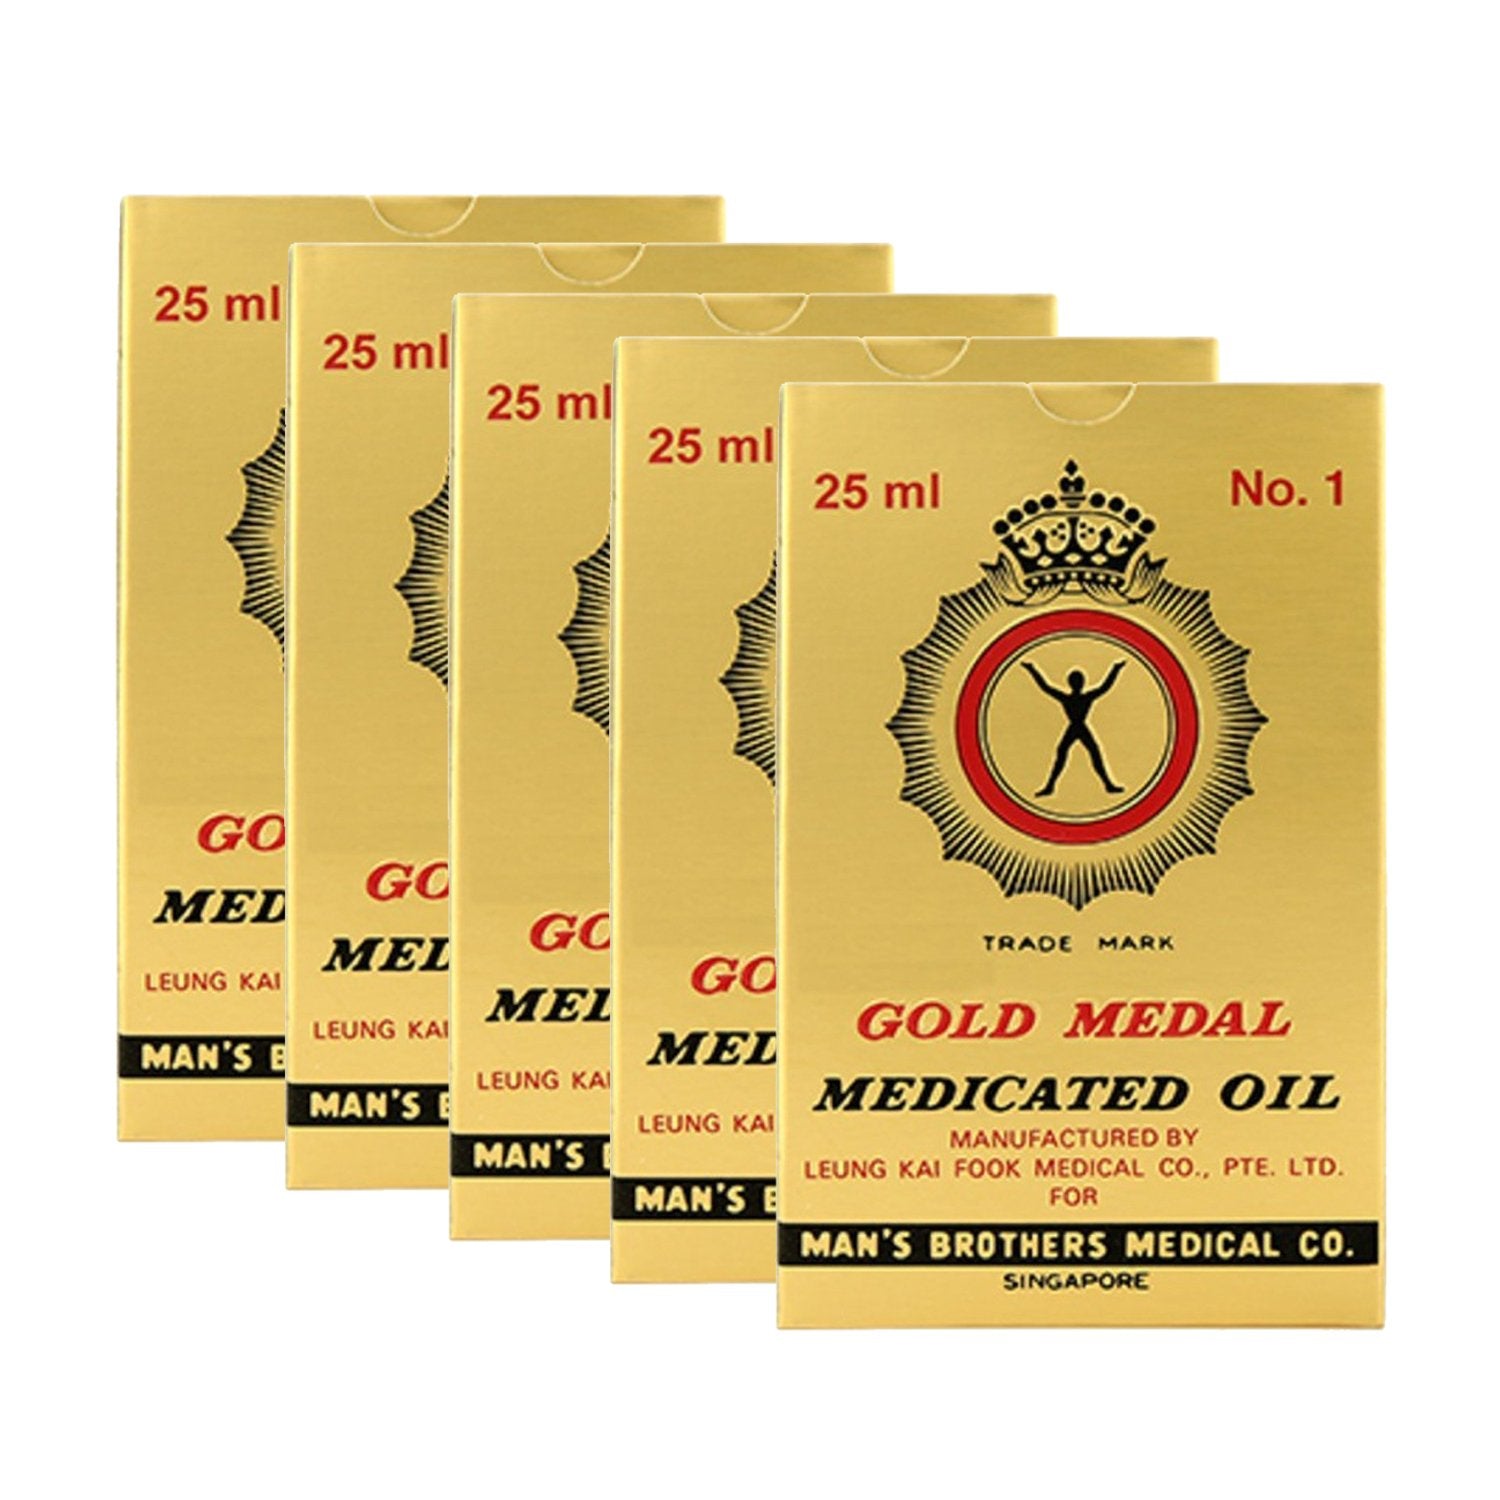 Gold Medal Medicated Oil Pain relief with refreshing aroma - 25ml - Sabkhareedo.com